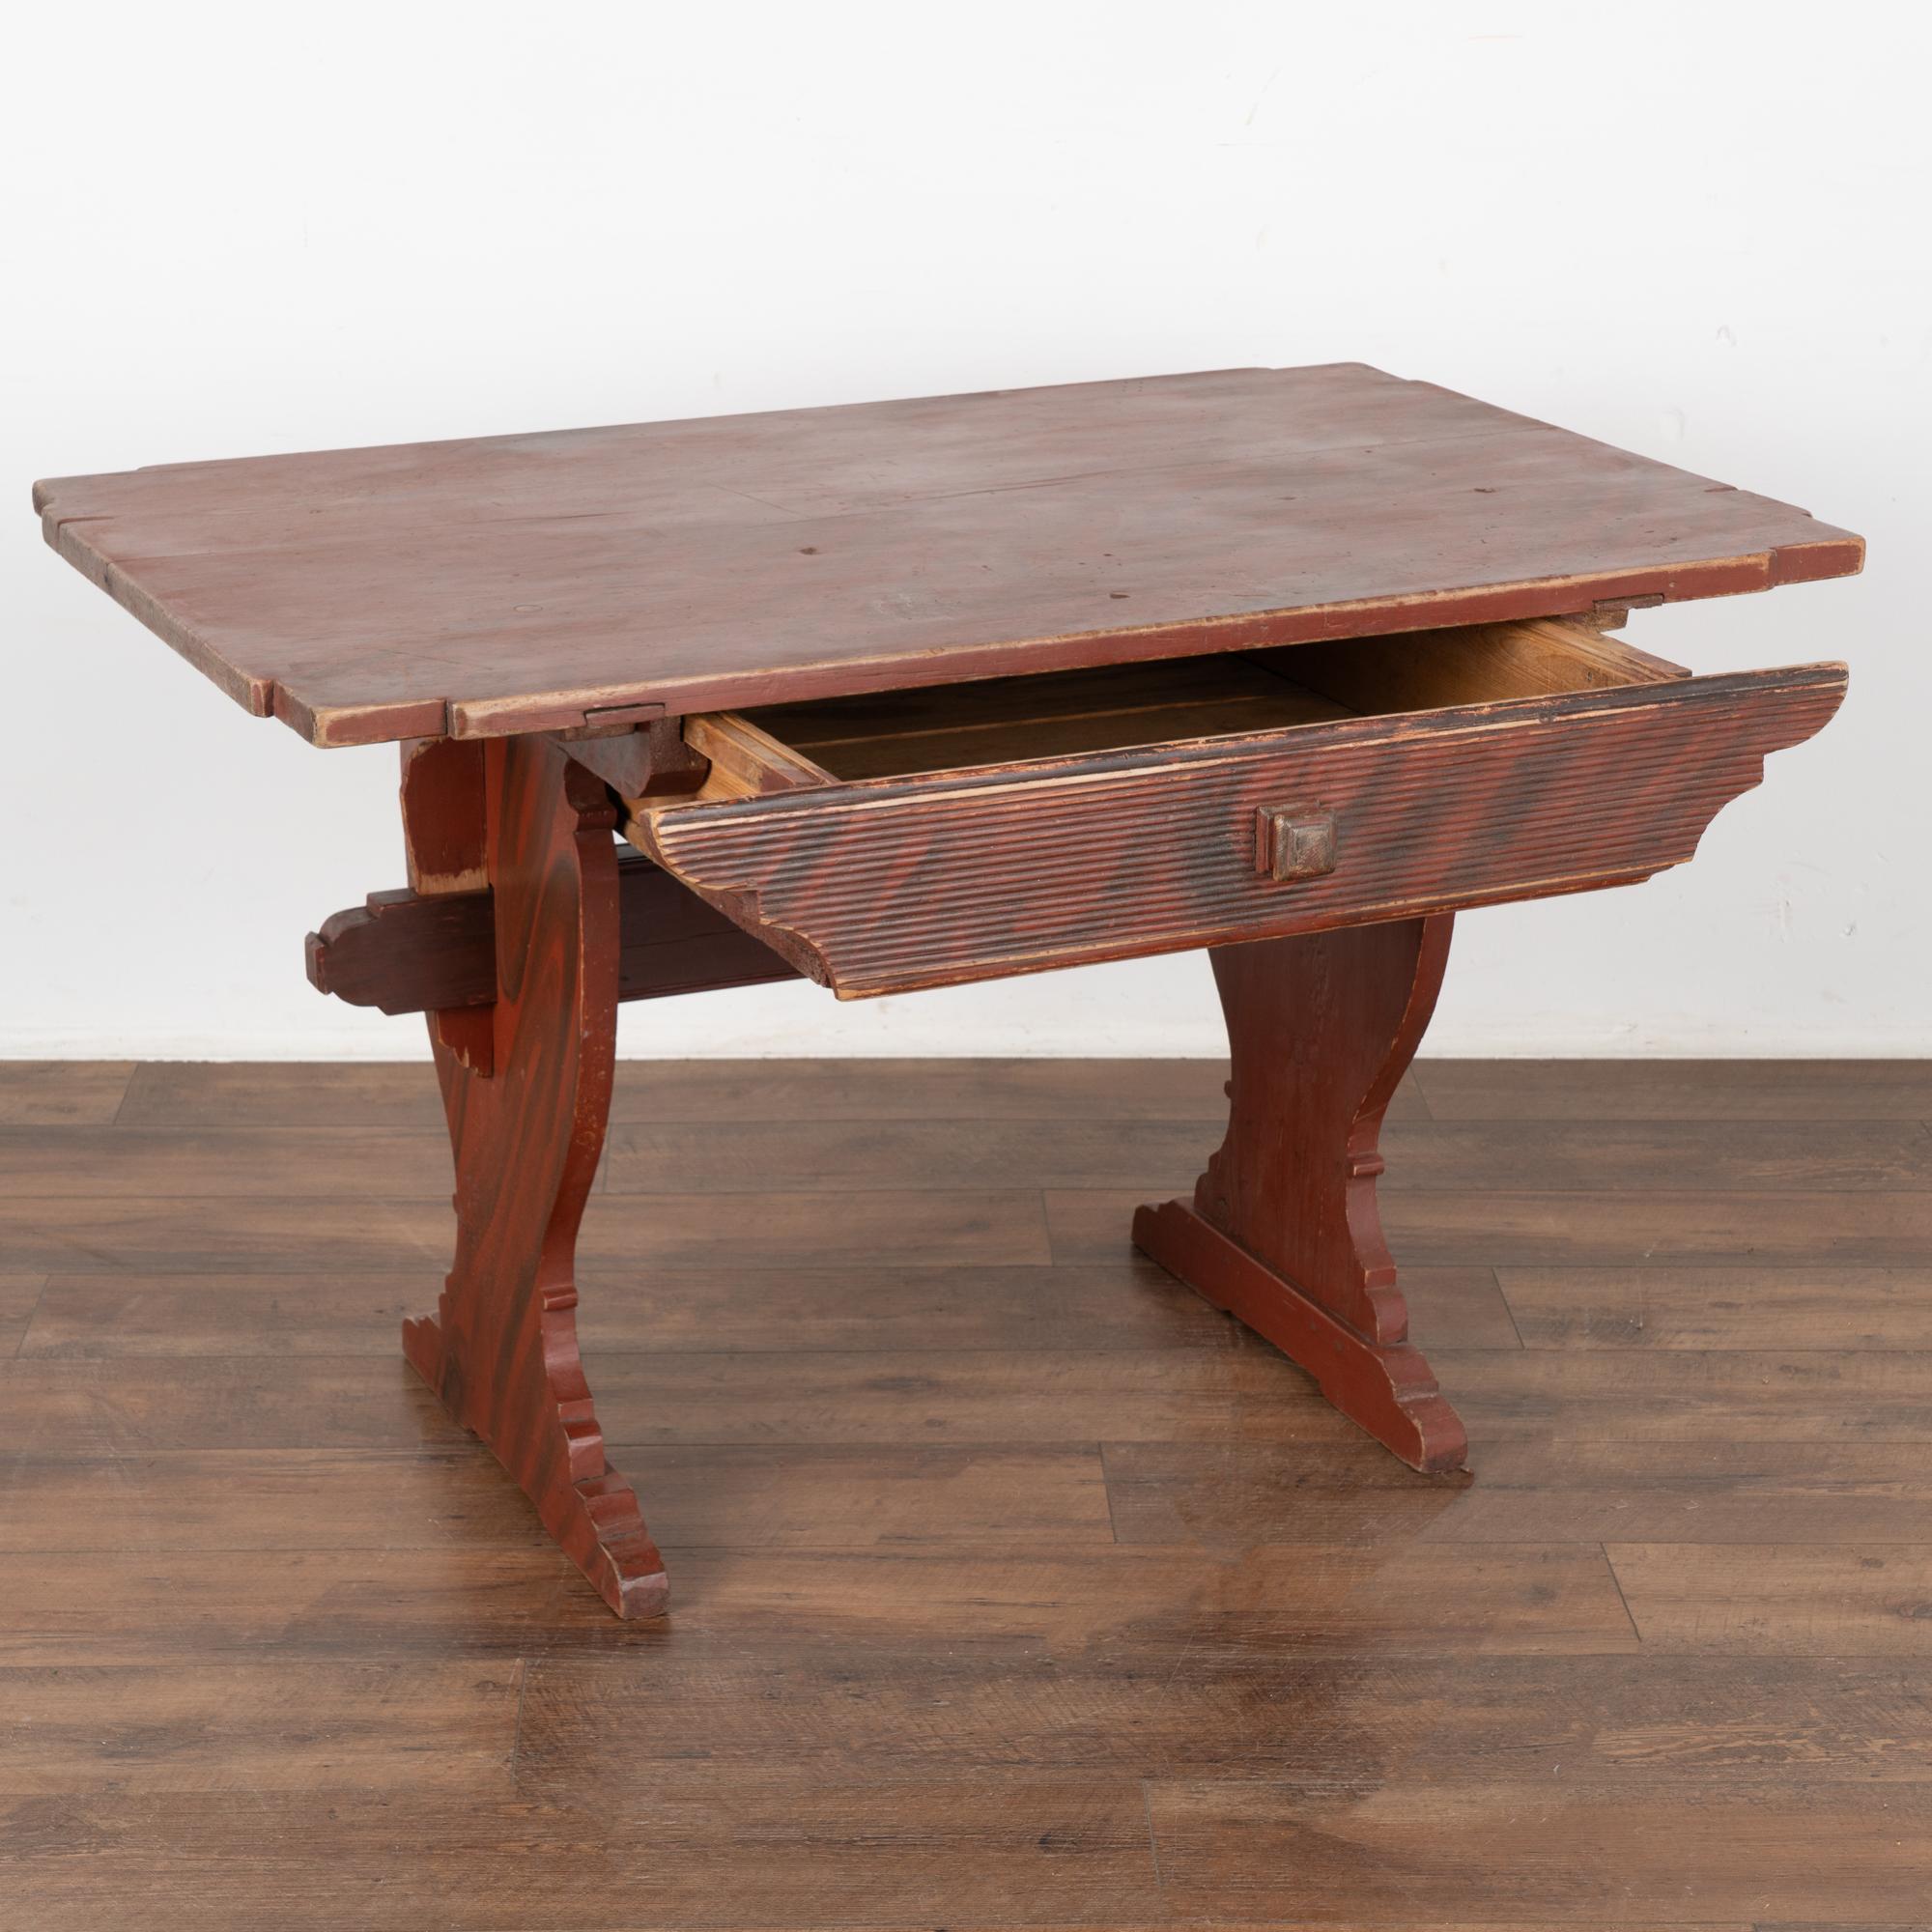 Country Original Red Painted Farm Table With Drawer, Sweden circa 1820-40 For Sale